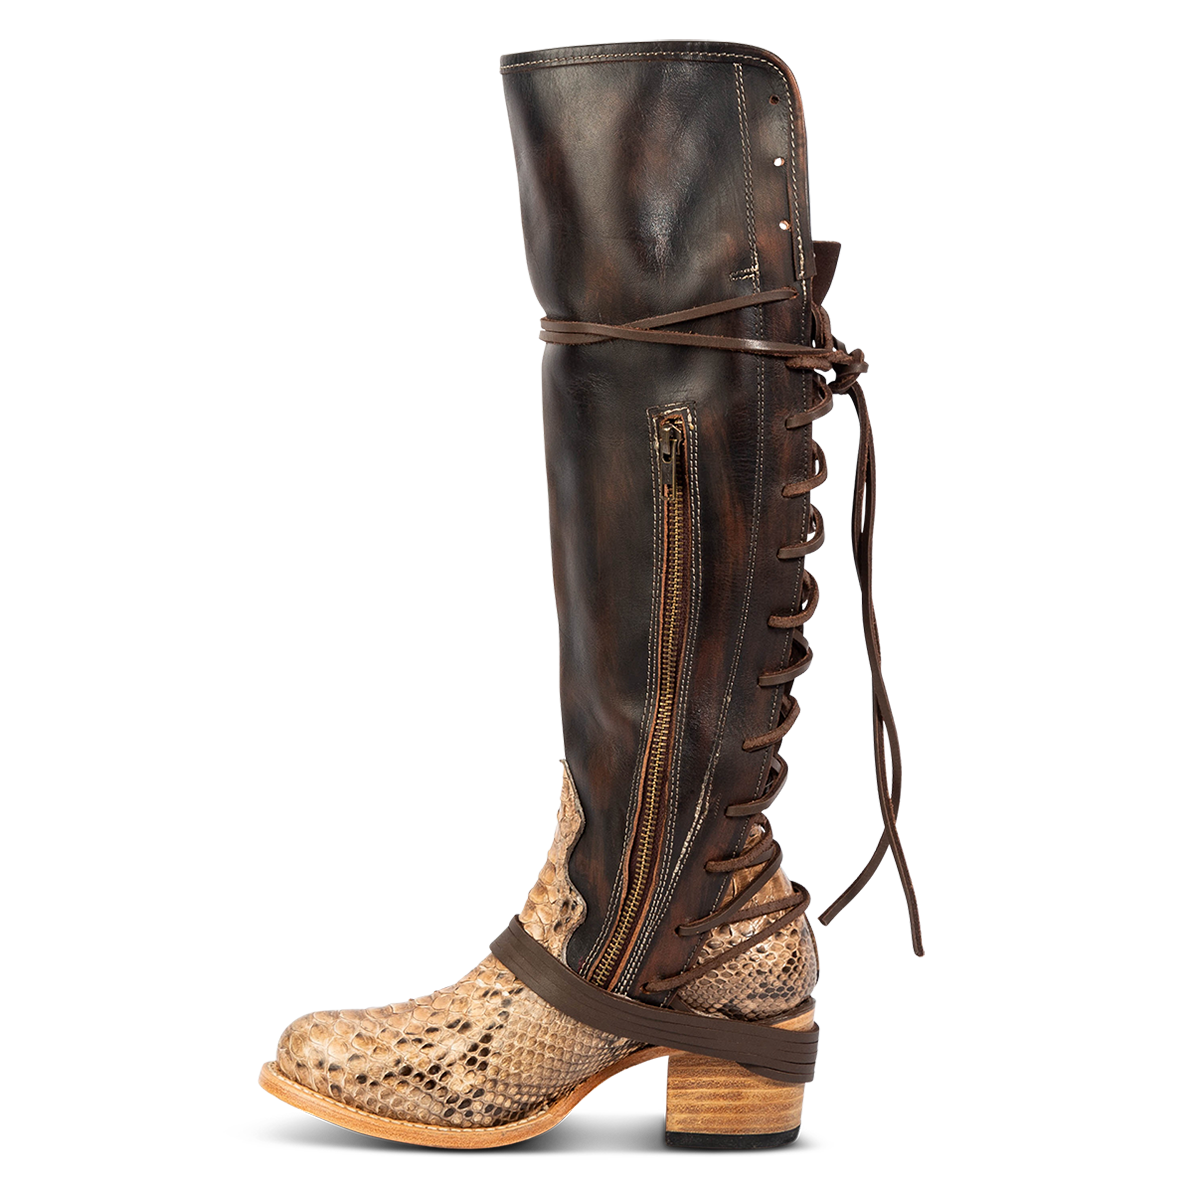 Inside view showing working brass zip closure and adjustable wrap around laces on FREEBIRD women's Coal beige python leather tall boot 